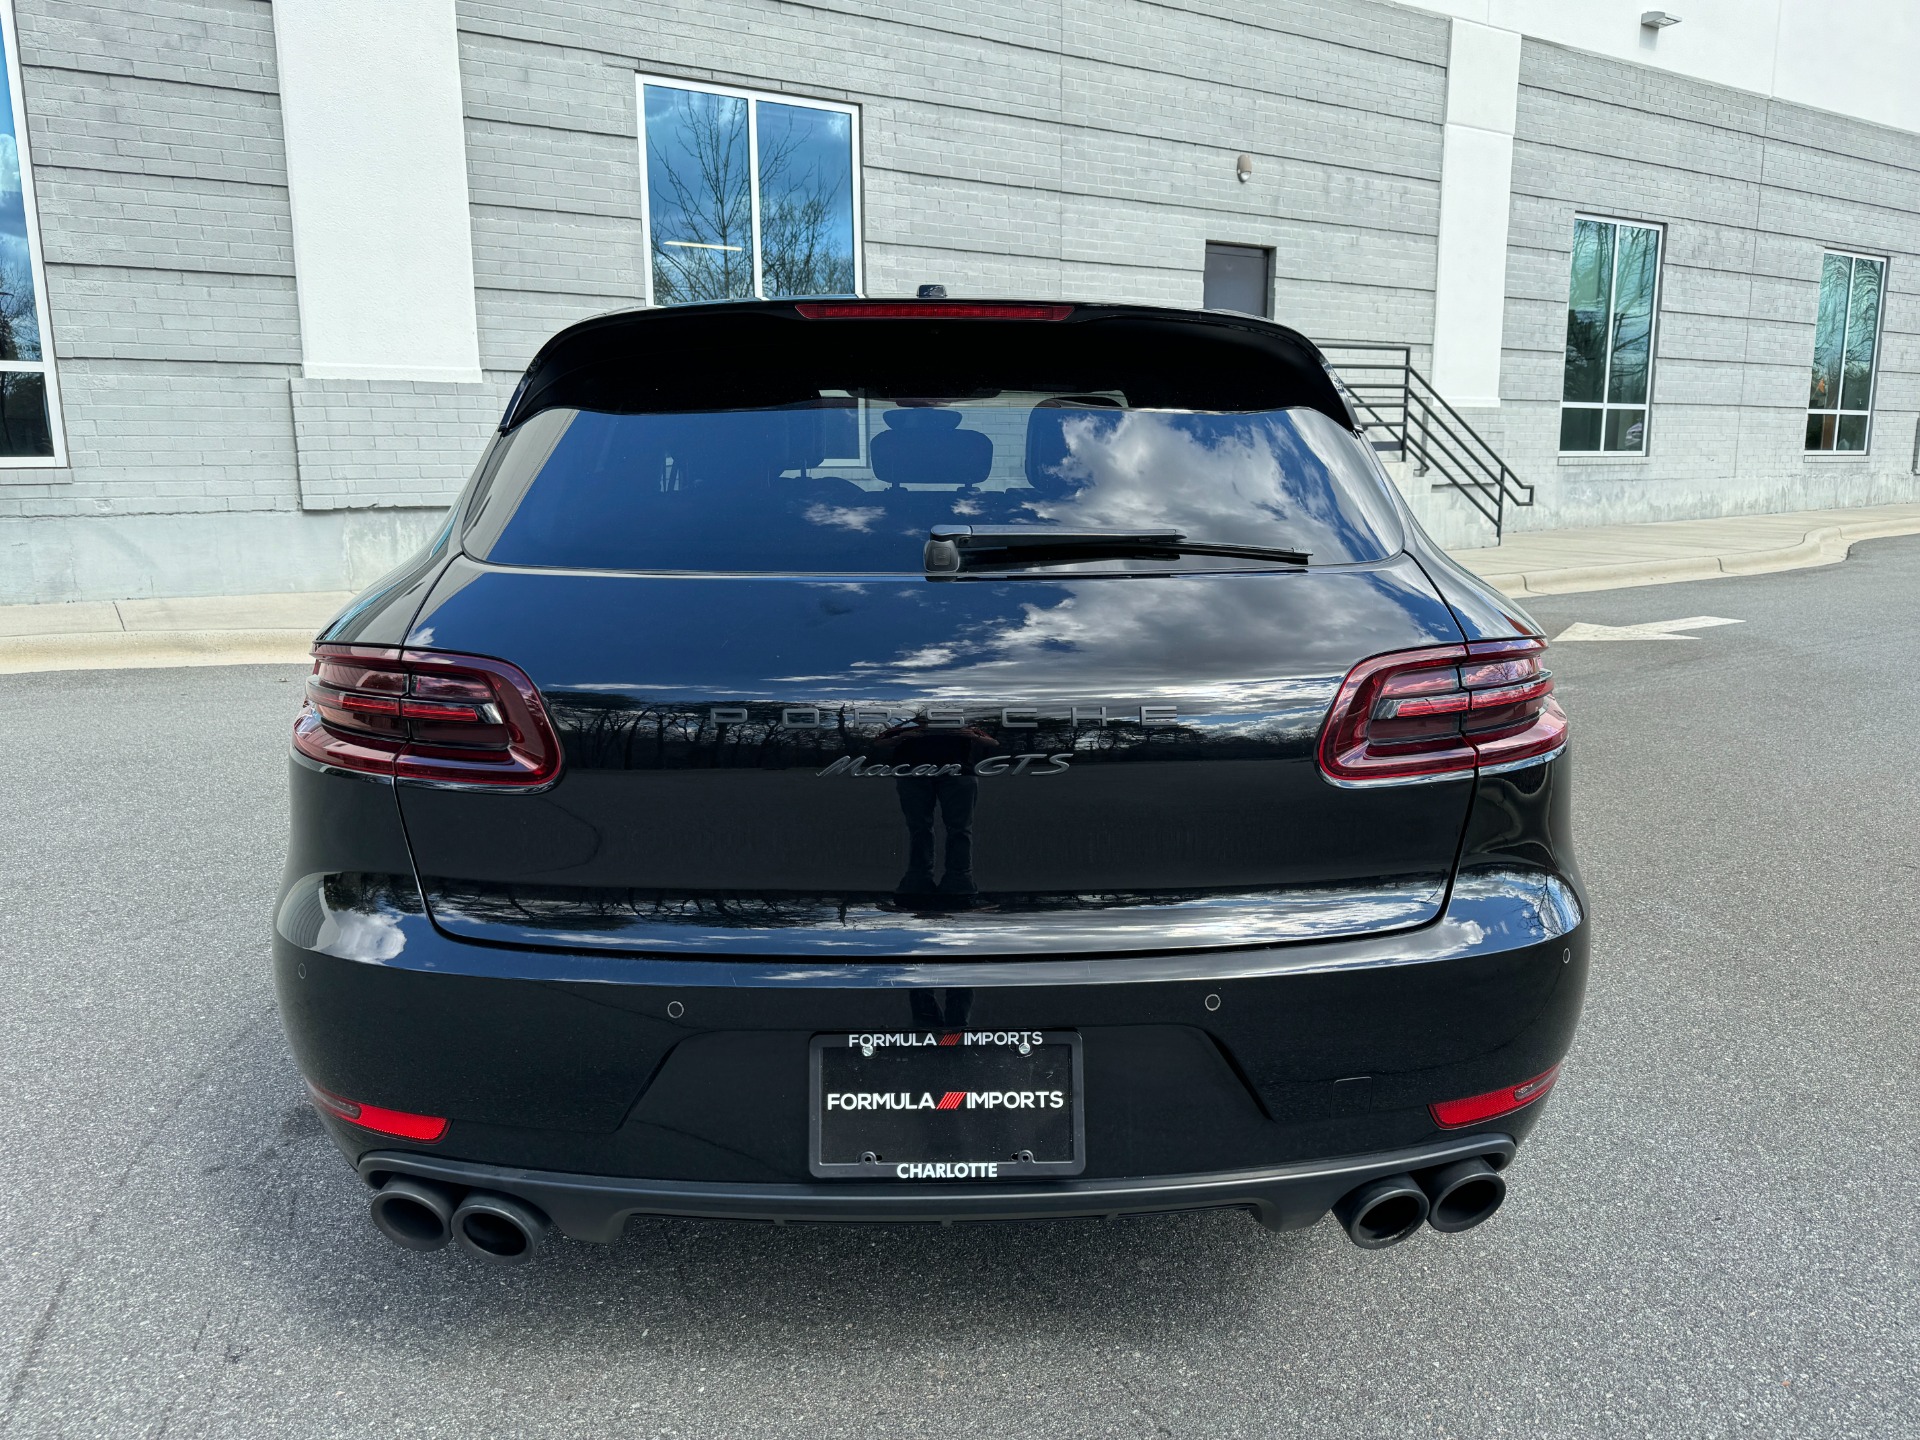 Used 2018 Porsche Macan GTS / 20IN WHEELS / PREMIUM PLUS / BOSE / SPORT SEATS for sale $53,995 at Formula Imports in Charlotte NC 28227 10